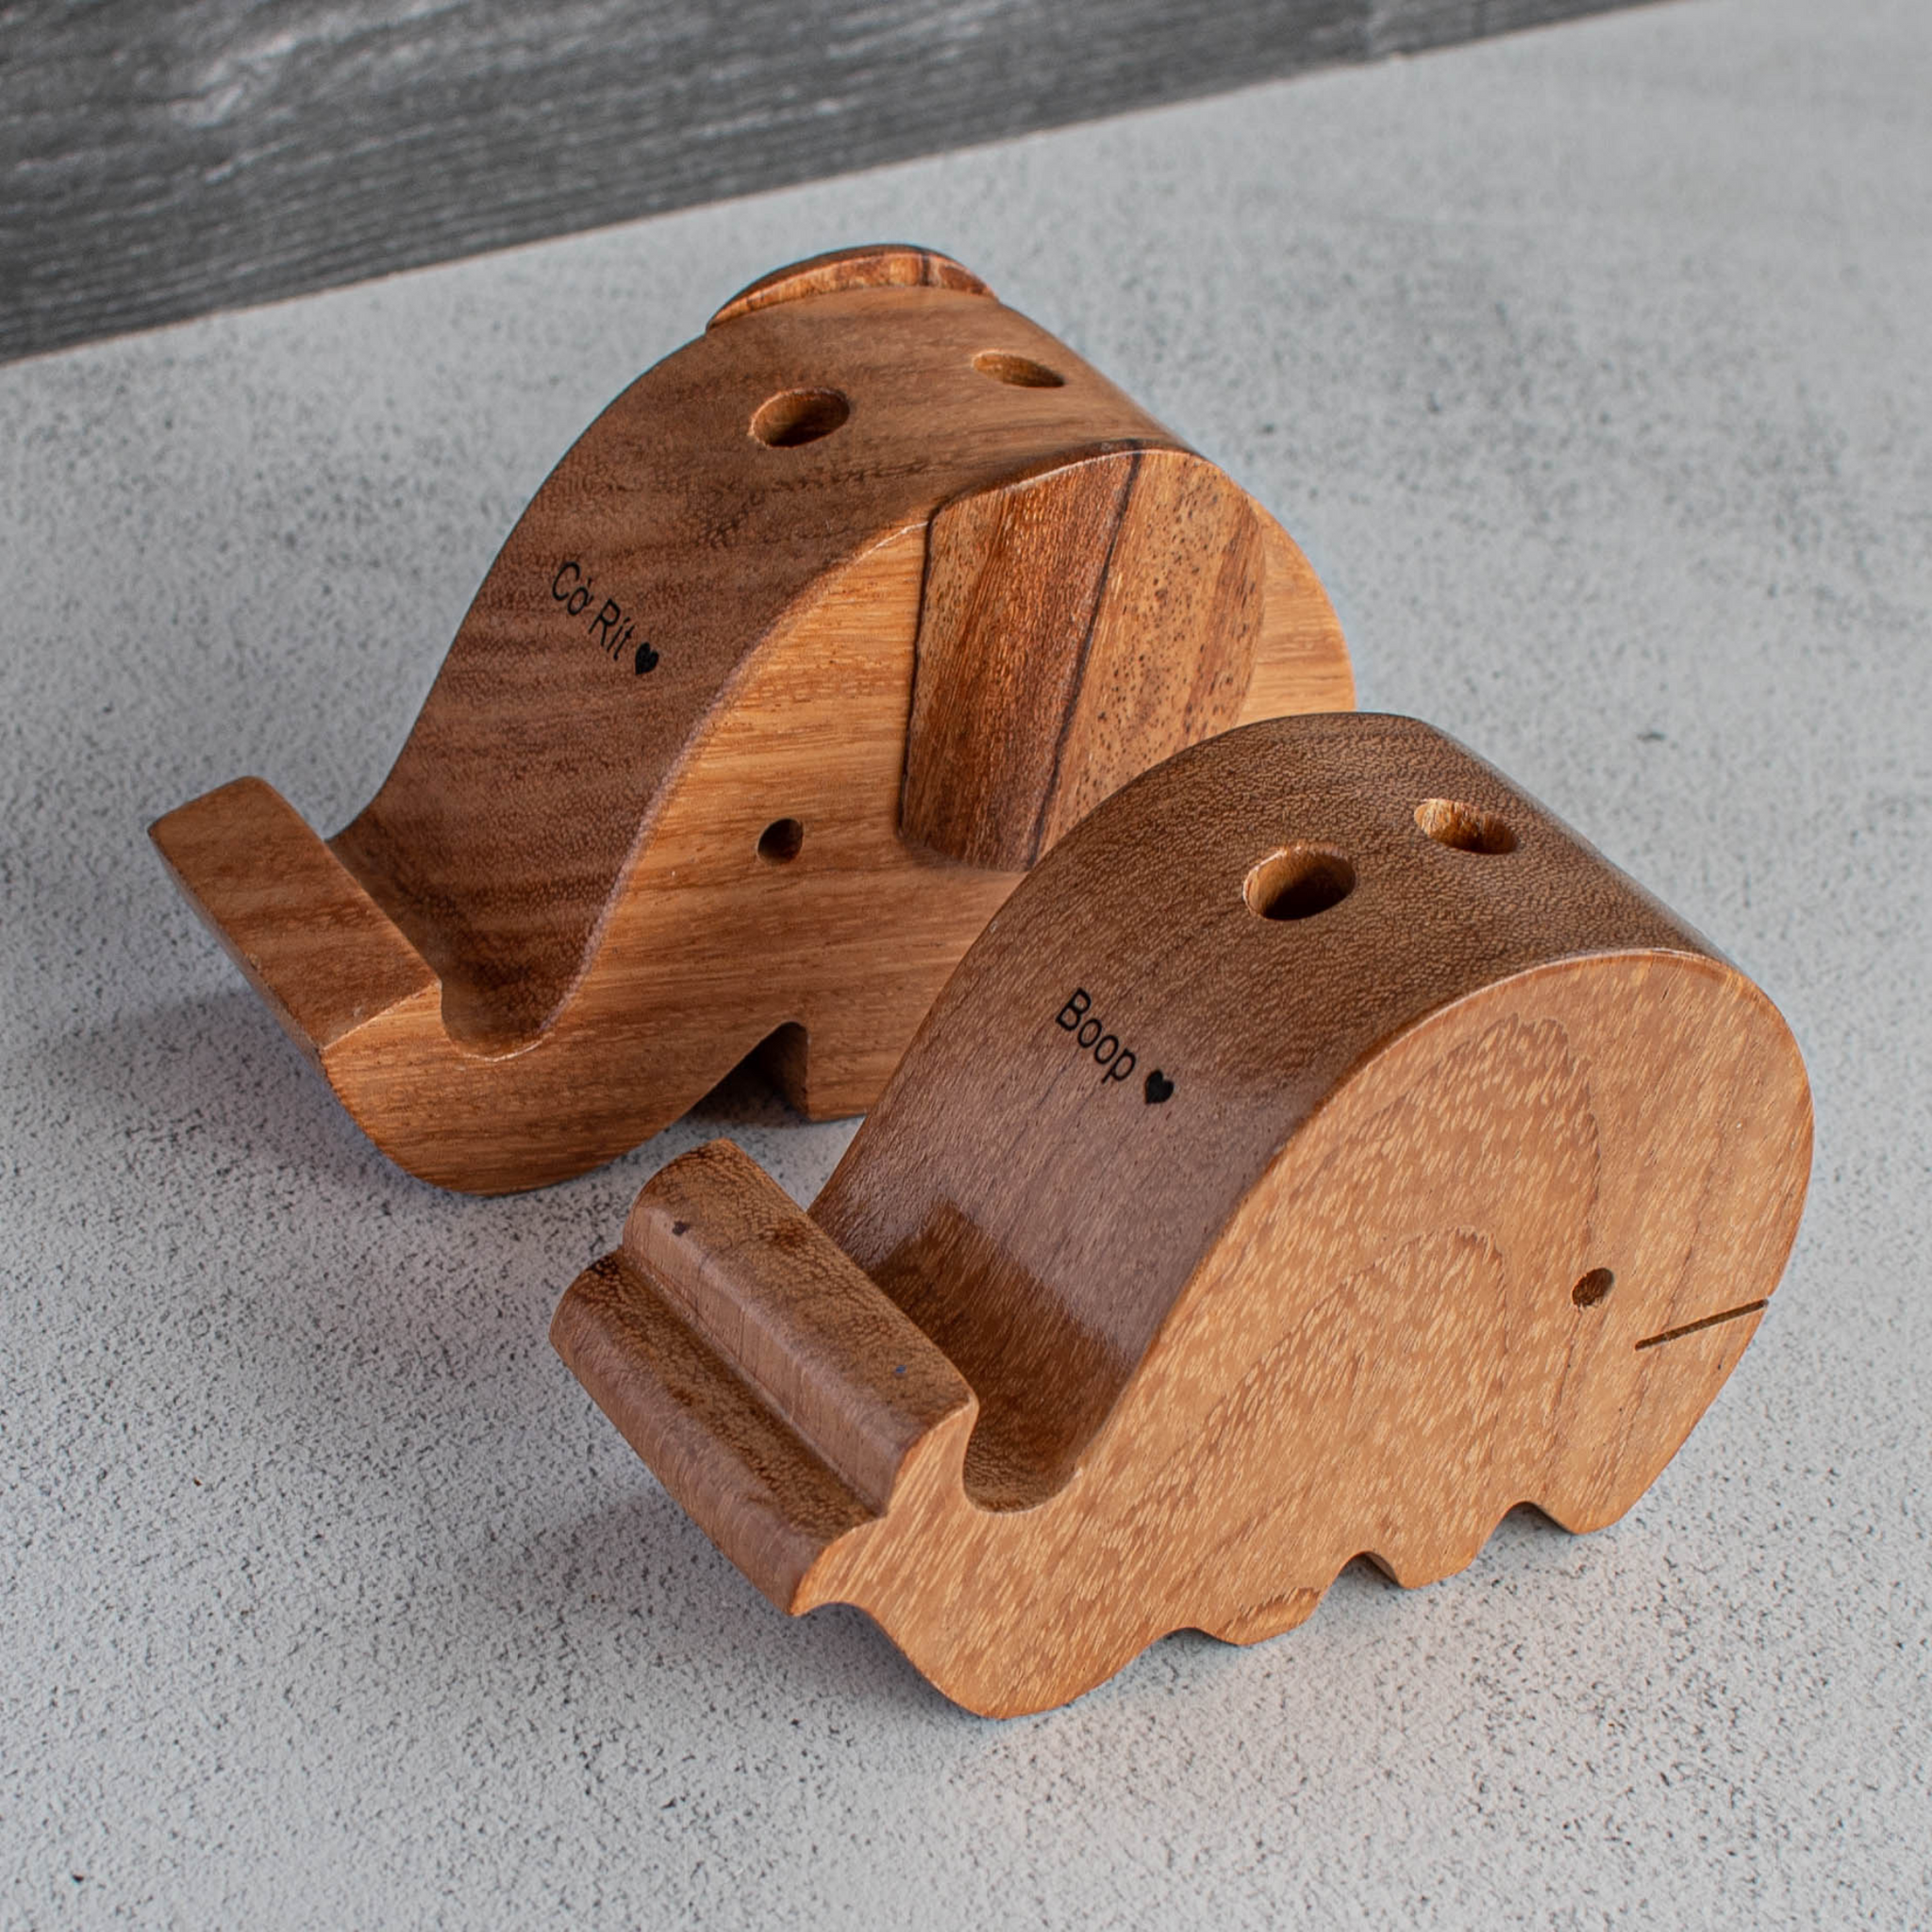 Phone Holder and Pen Holder- Solid Wood Dock - Dolphin/Elephant